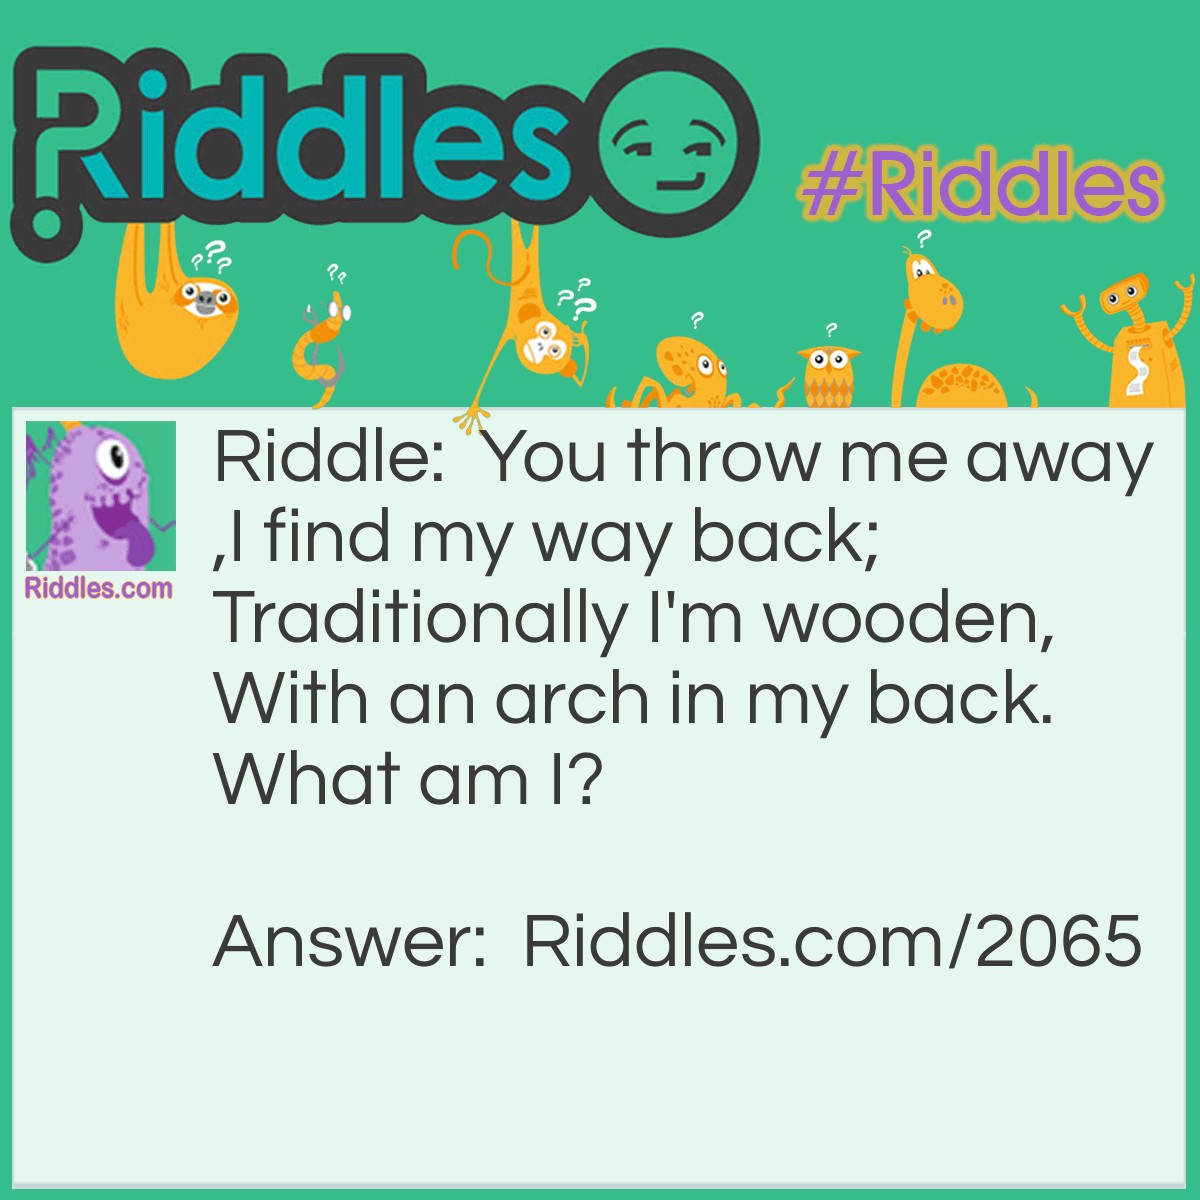 Riddle: You throw me away, I find my way back; Traditionally I'm wooden, With an arch in my back. What am I? Answer: A Boomerang.